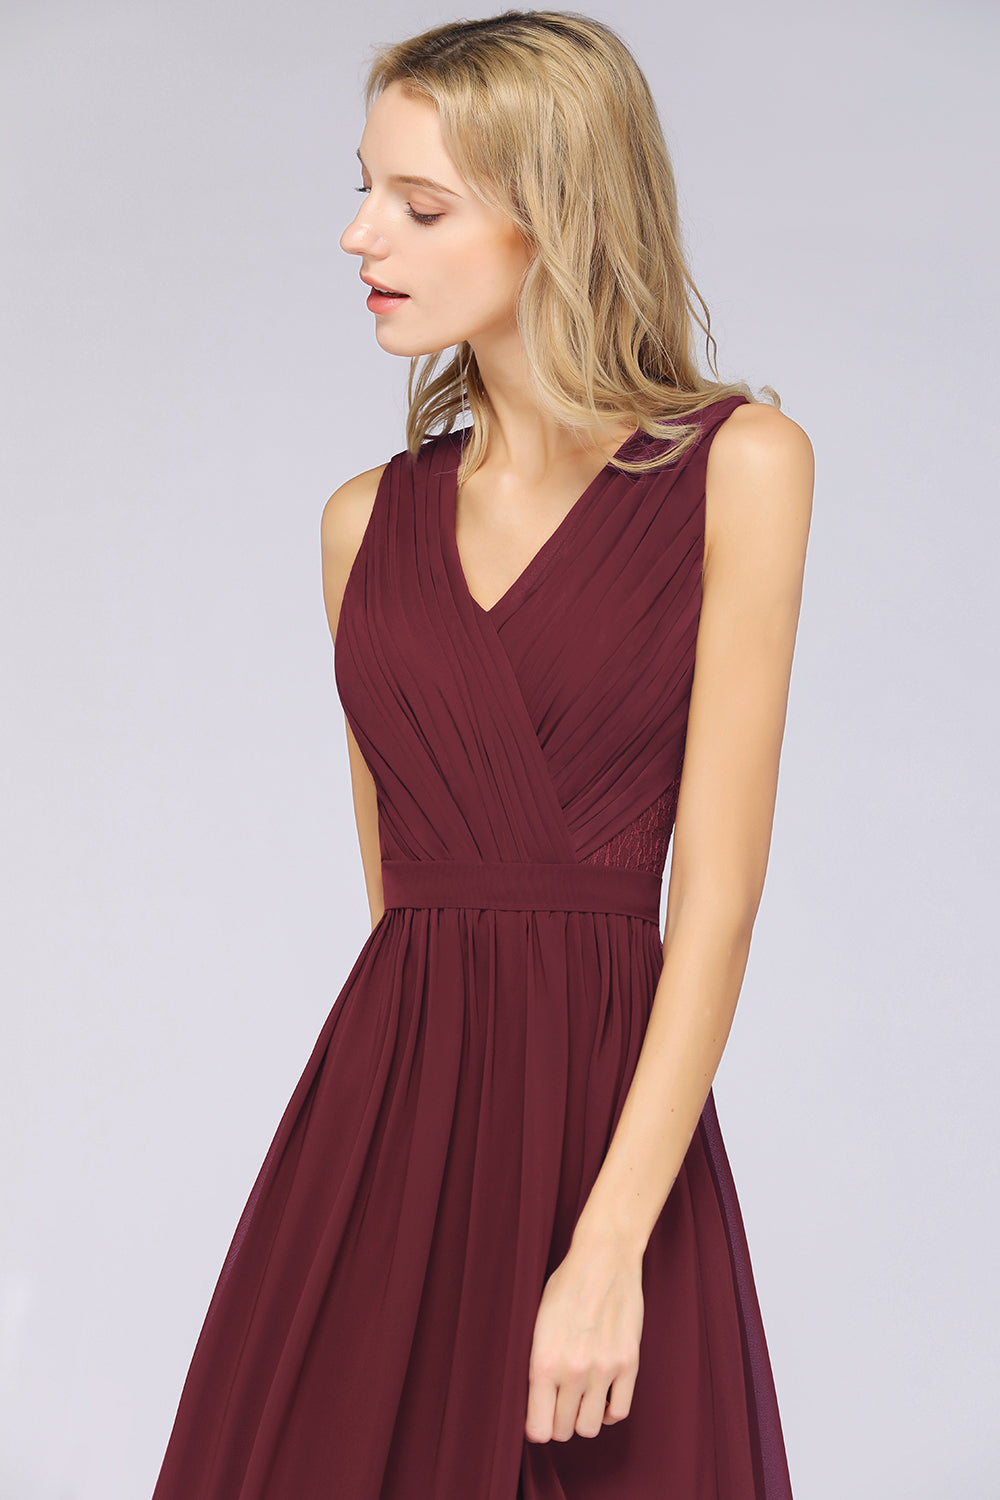 Affordable Burgundy V-Neck Ruffle Bridesmaid Dresses with Lace-Back